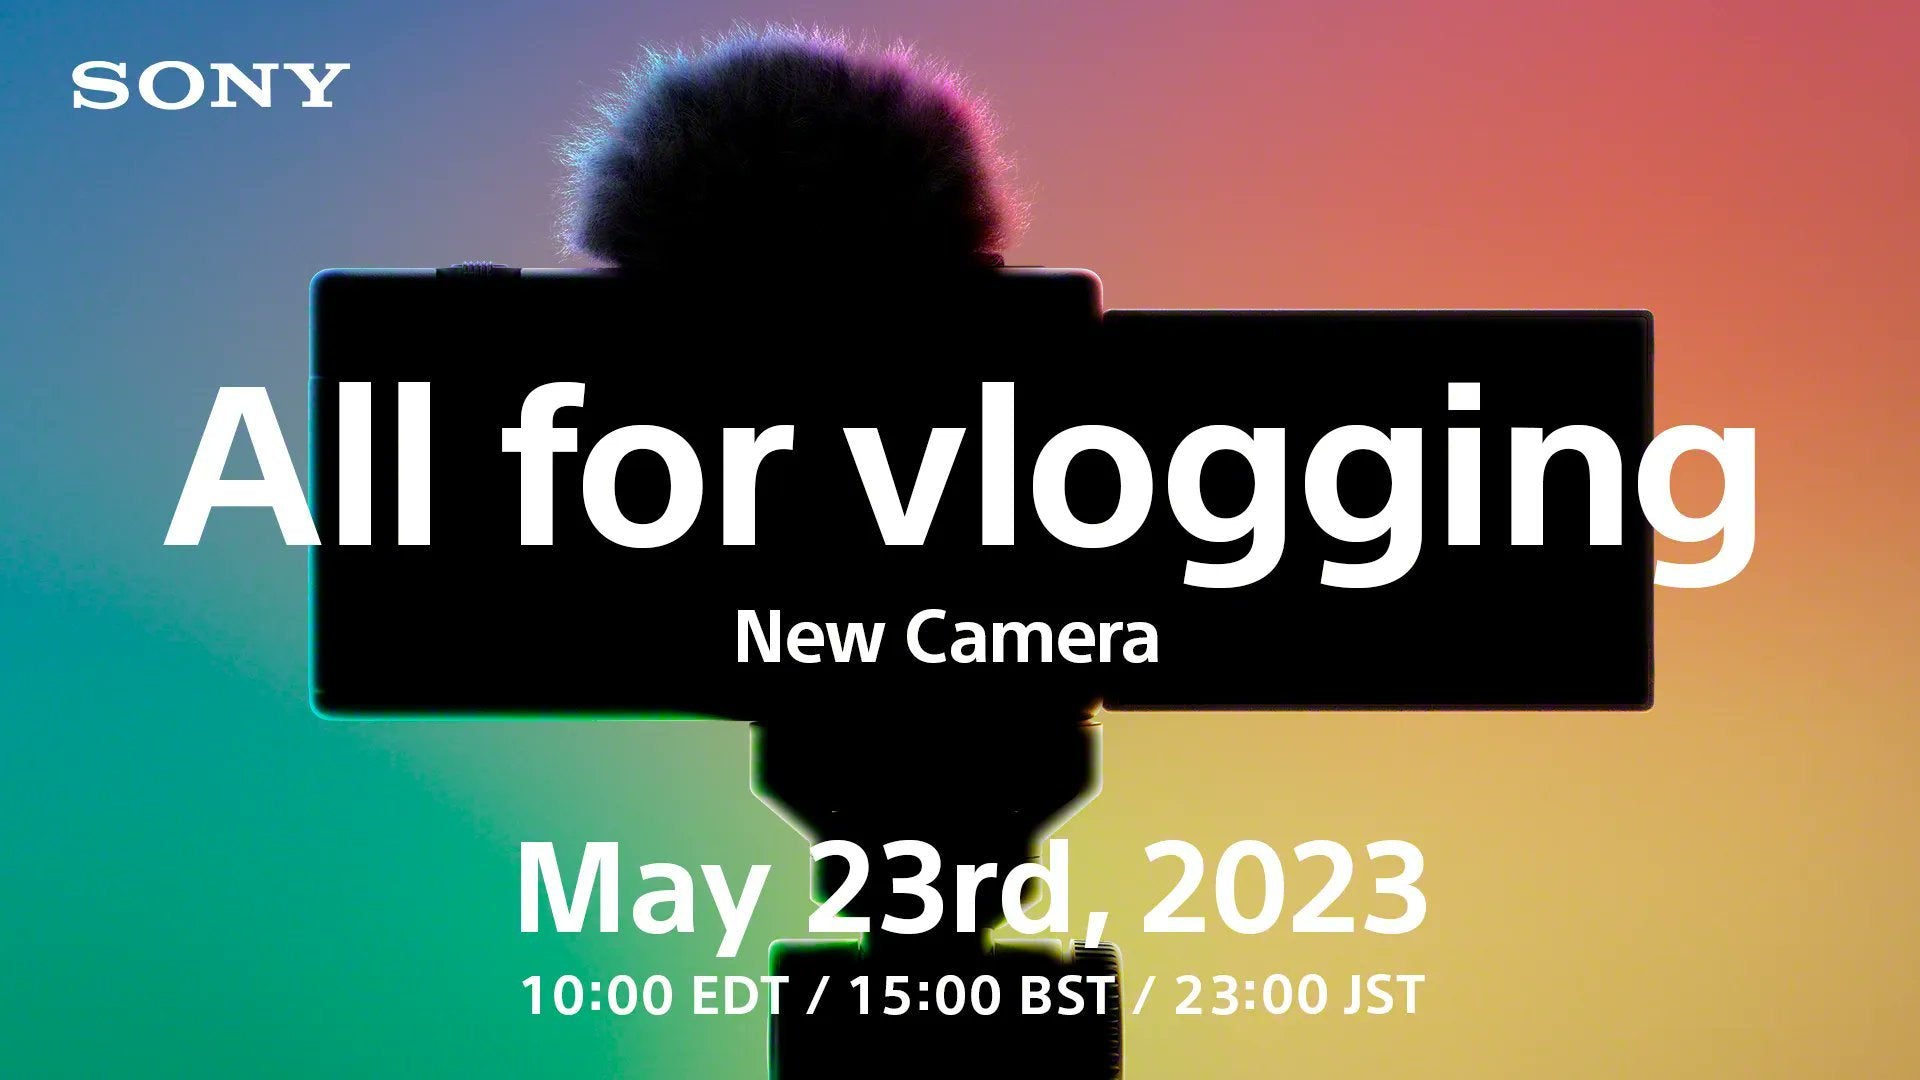 Sony's Next Big Reveal: New Vlogging Camera Launching on May 23rd